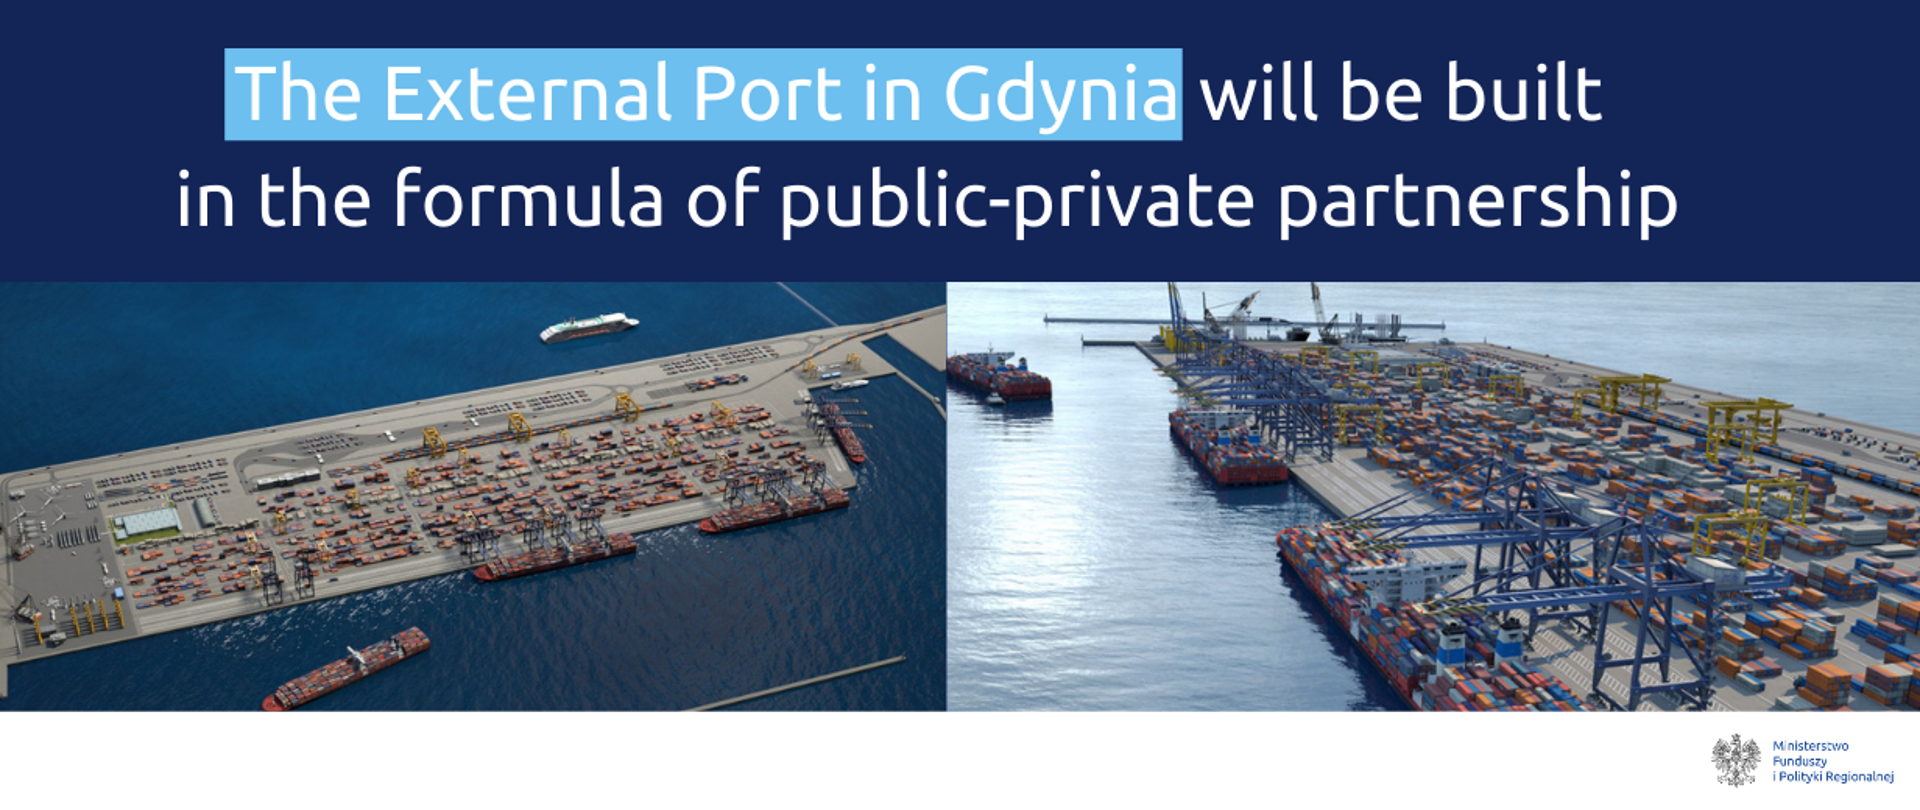 An inscription on the graphics at the top: "The External Port in Gdynia will be built in the formula of public-private partnership". Below pictures of the Port of Gdynia.